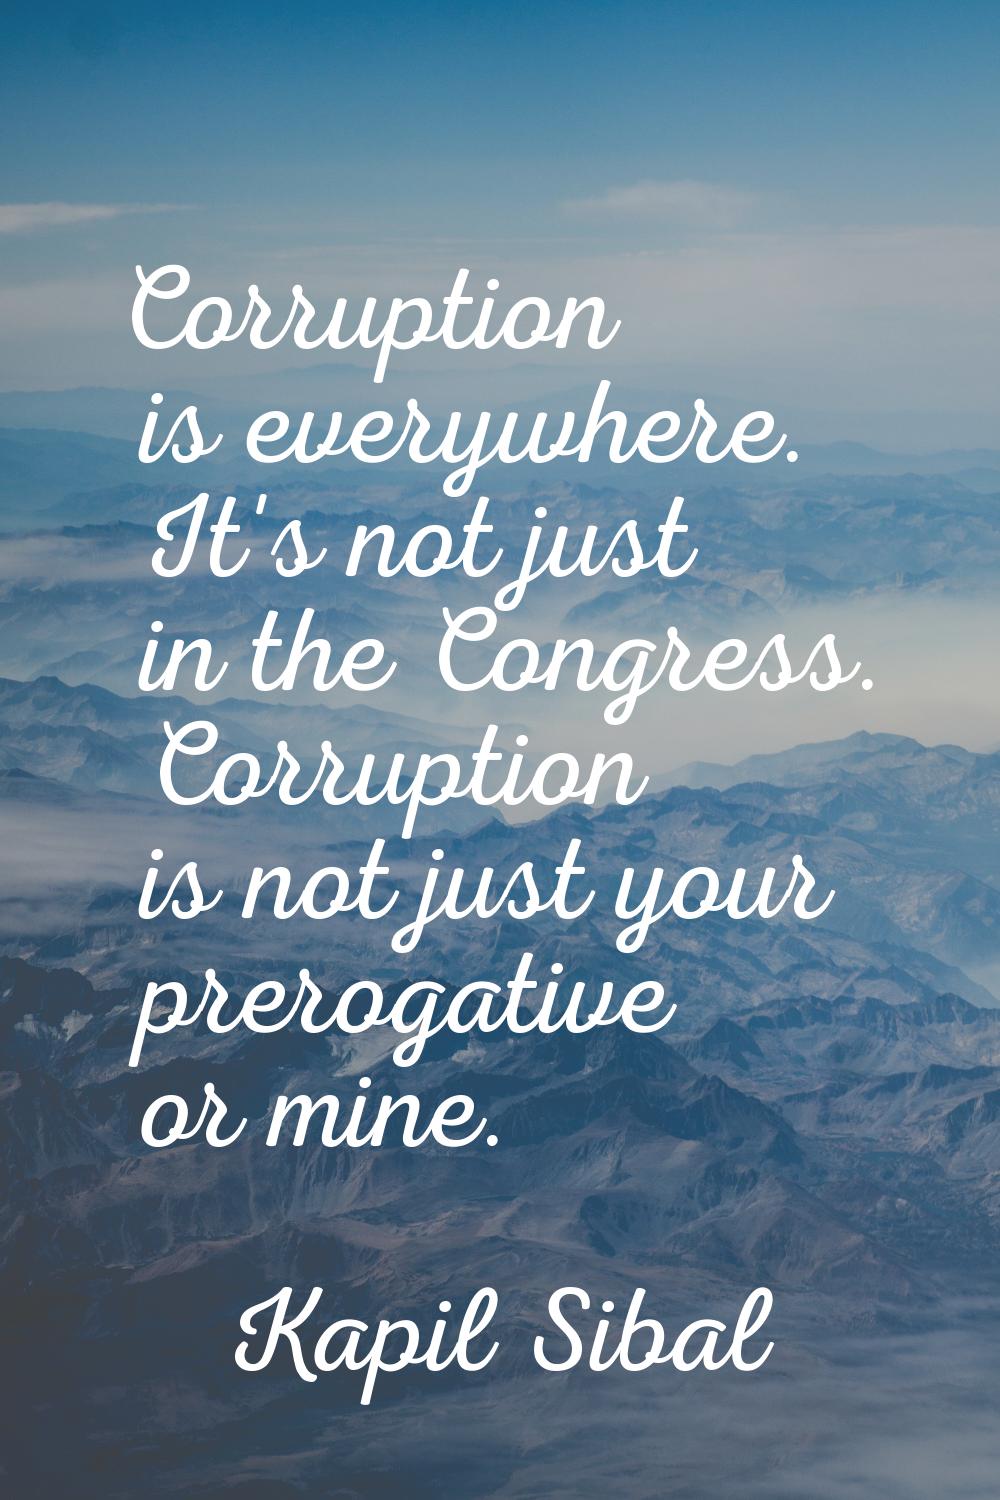 Corruption is everywhere. It's not just in the Congress. Corruption is not just your prerogative or